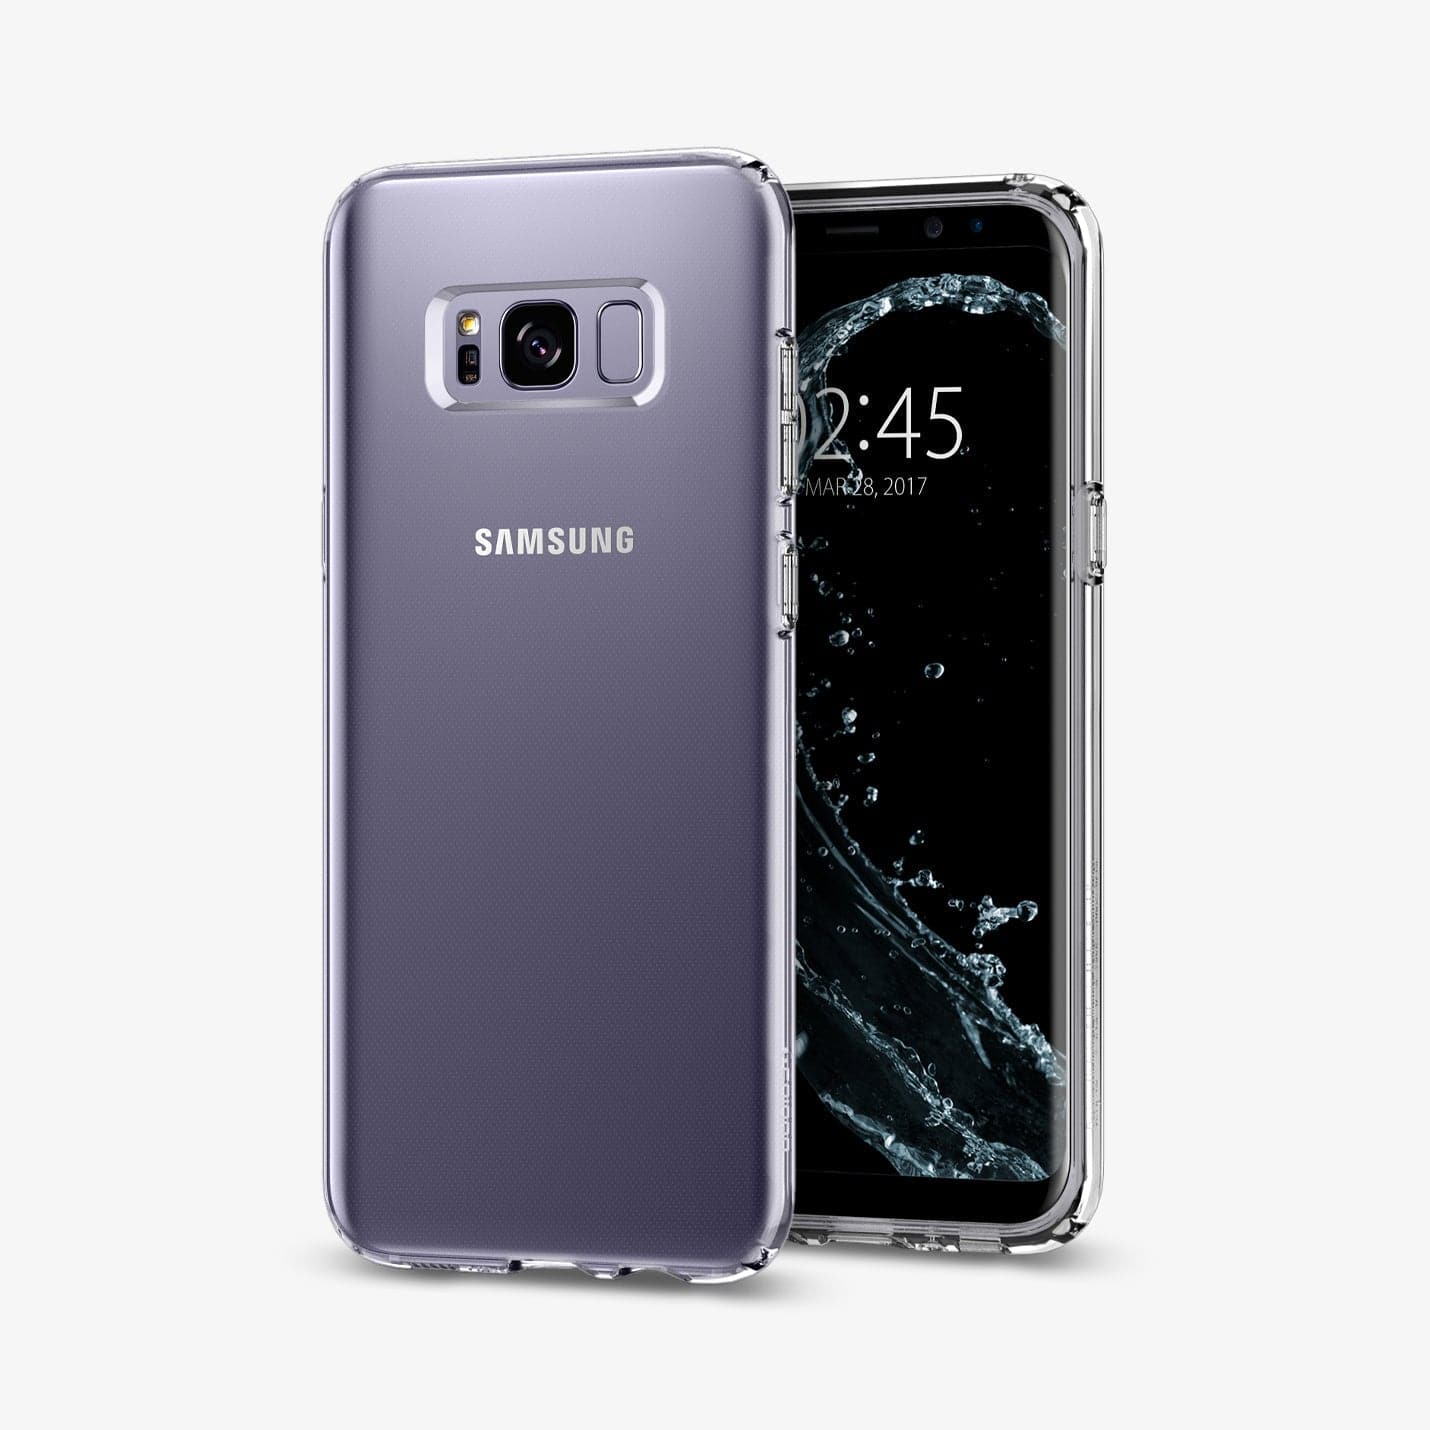 565CS21612 - Galaxy S8 Series Liquid Crystal Case in crystal clear showing the back and front